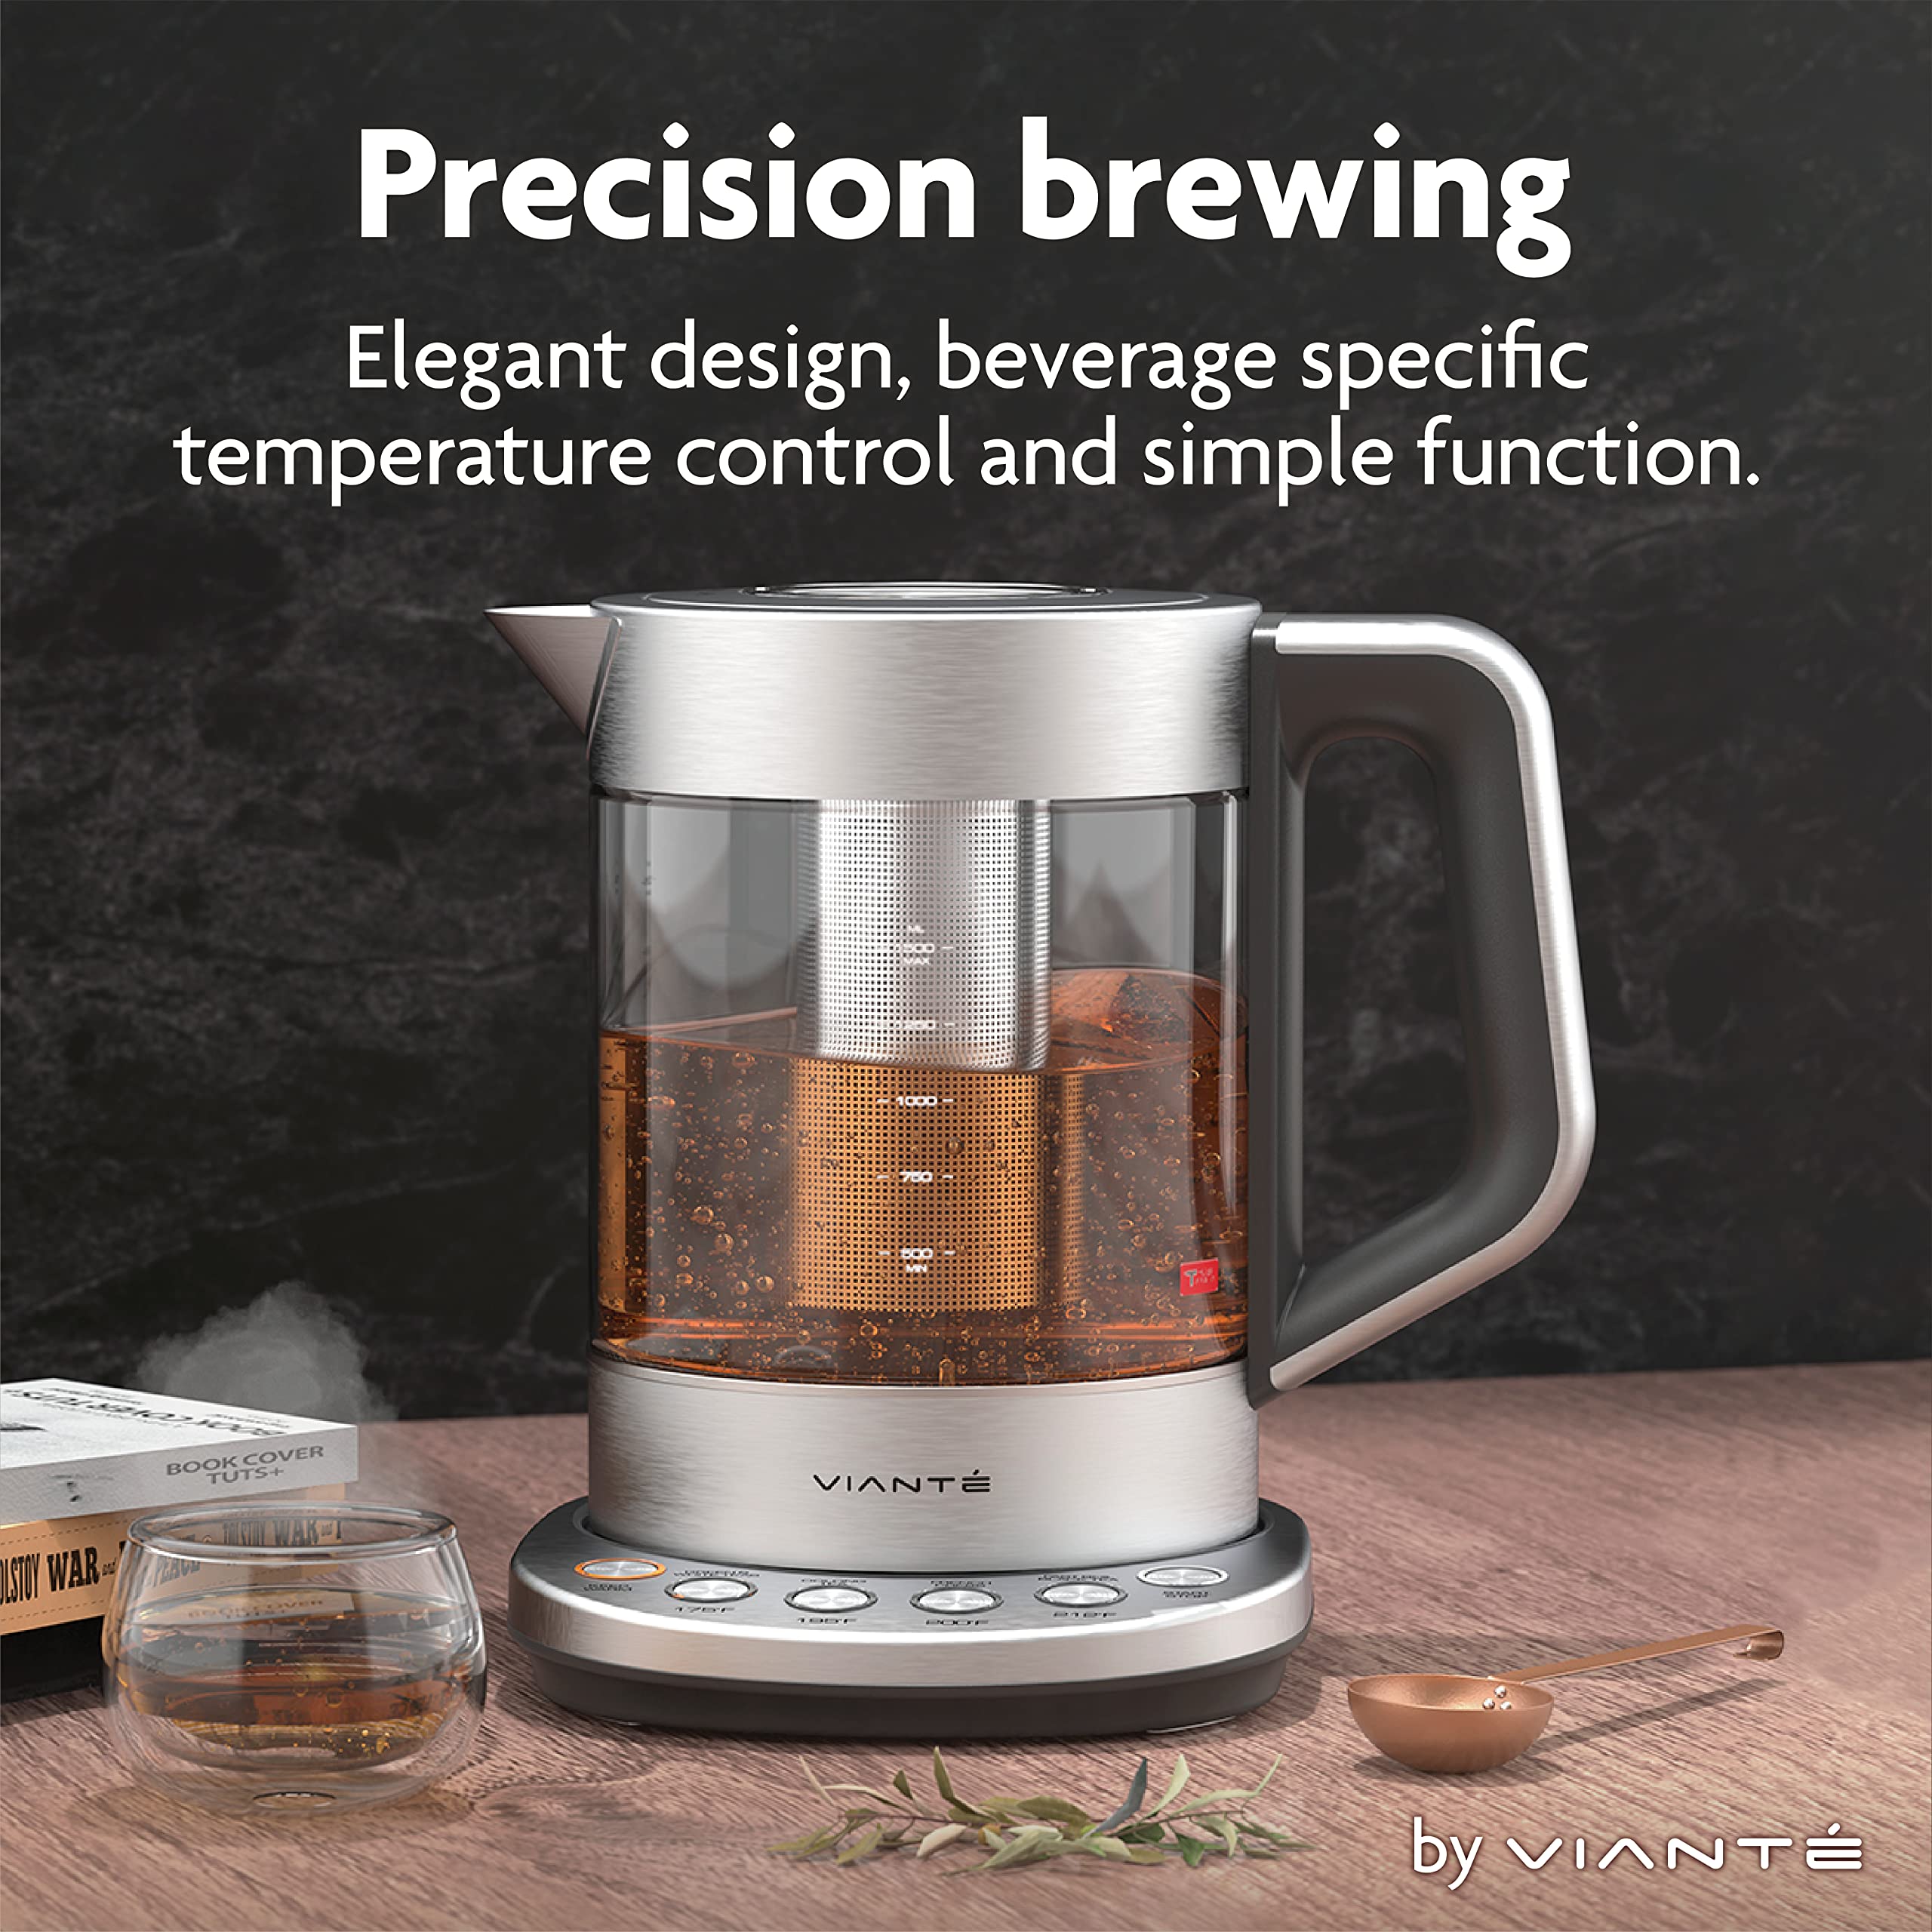 Hot Tea Maker Electric Glass Kettle with tea infuser and temperature control. Automatic Shut off. Brewing Programs for your favorite teas and Coffee.